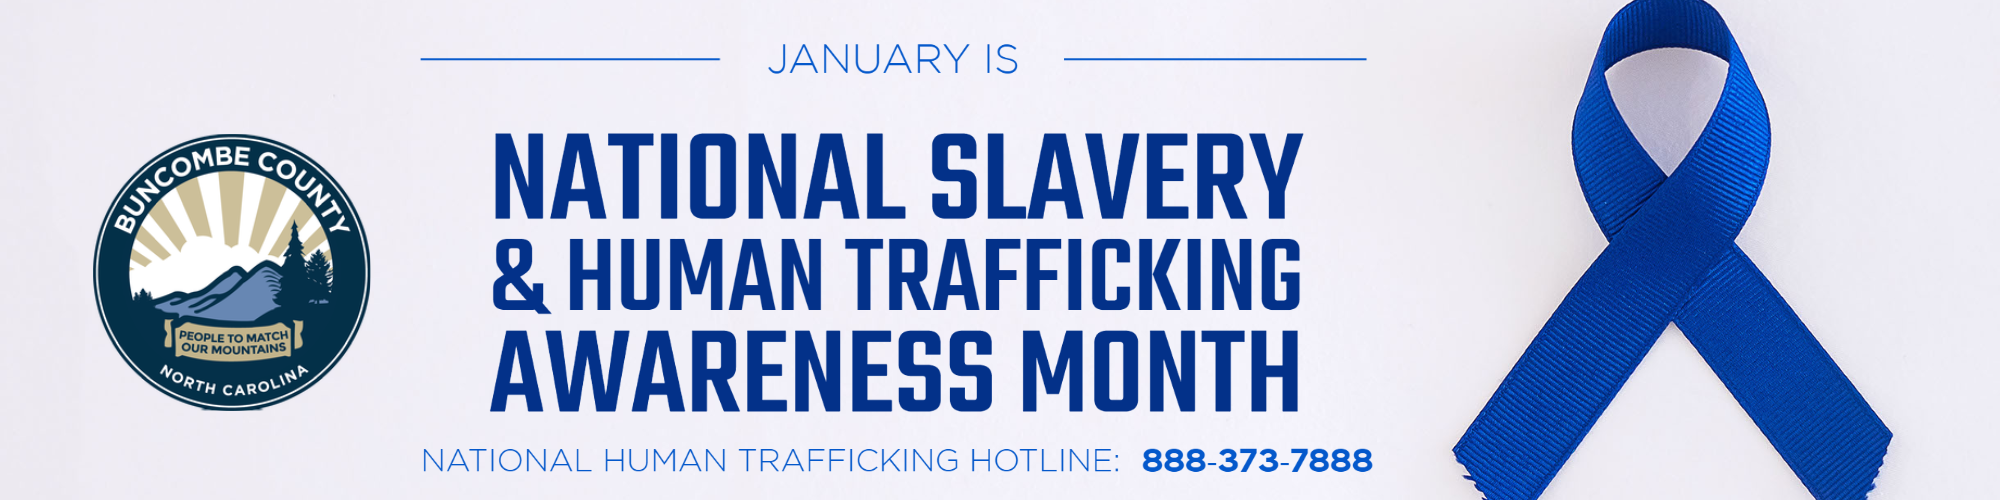 January is human trafficking month